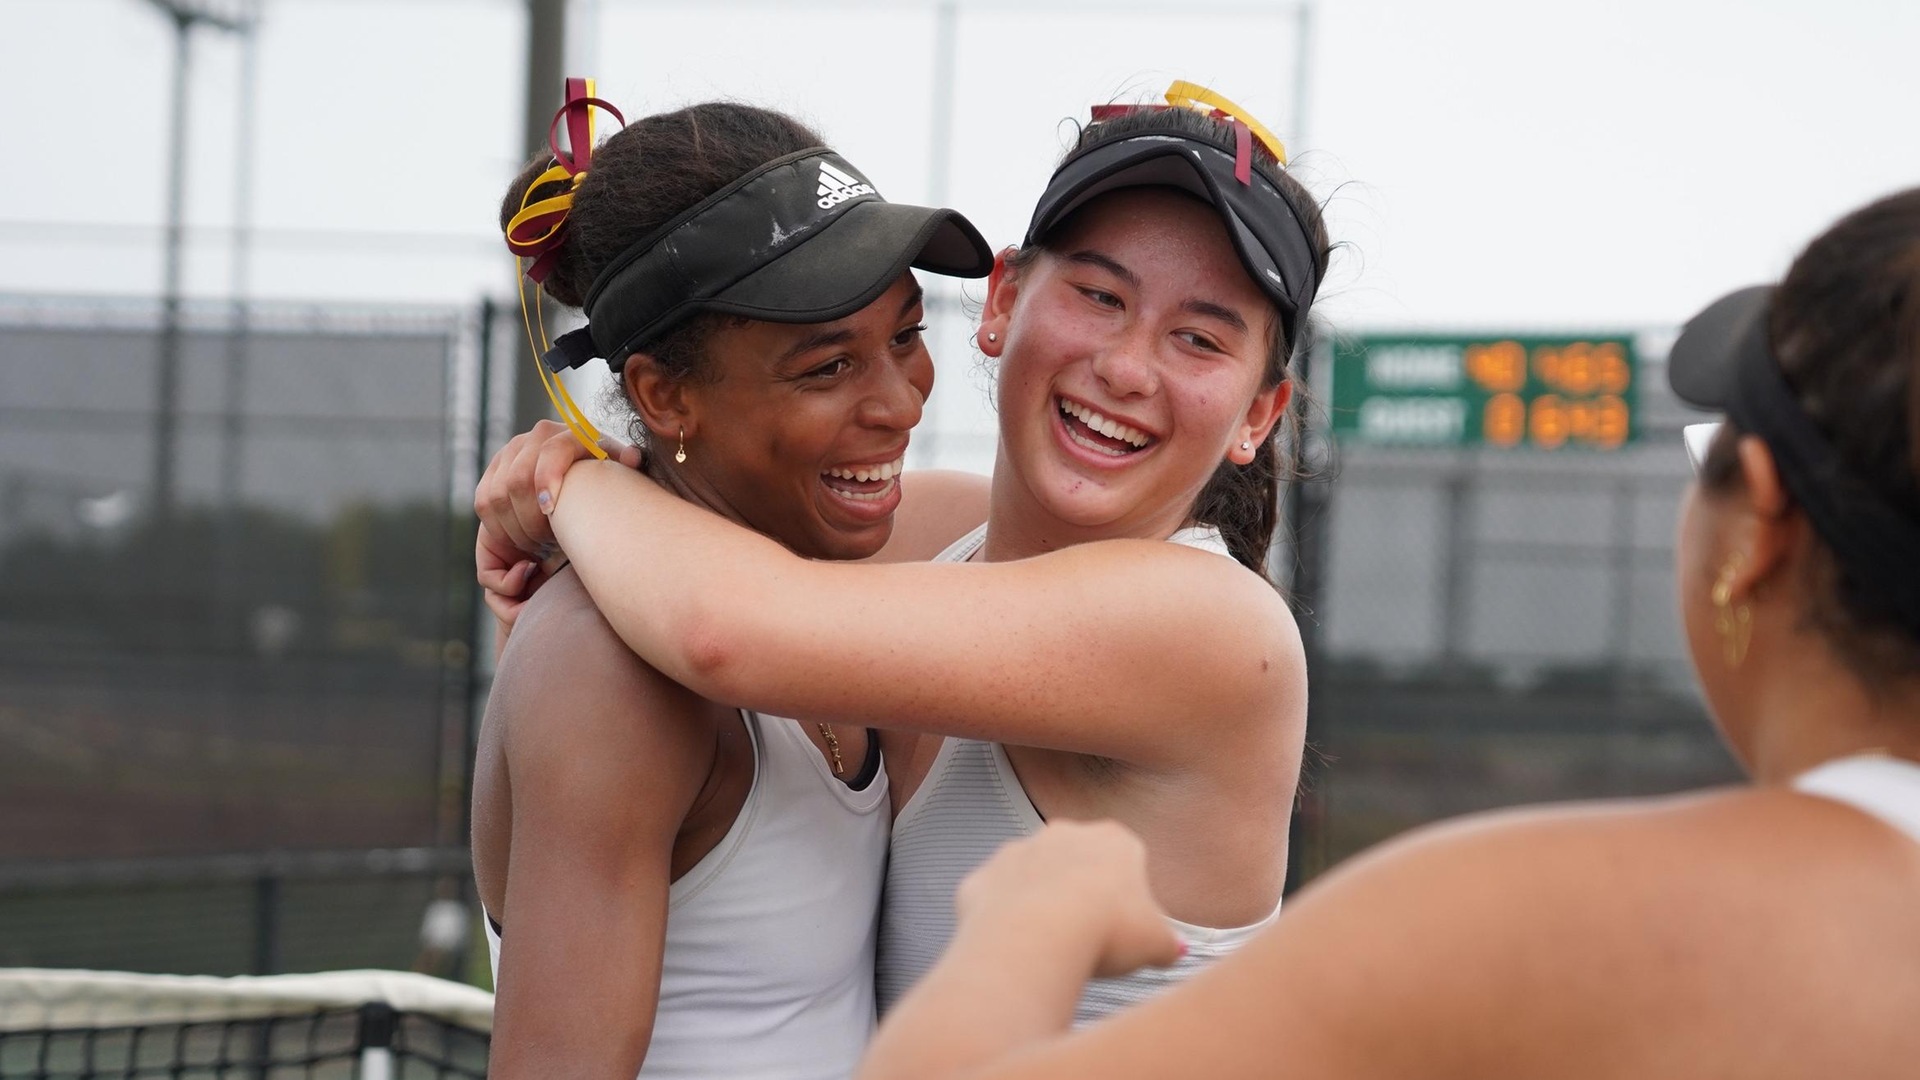 Ella Brissett and Lindsay Eisenman are the top seeded doubles team